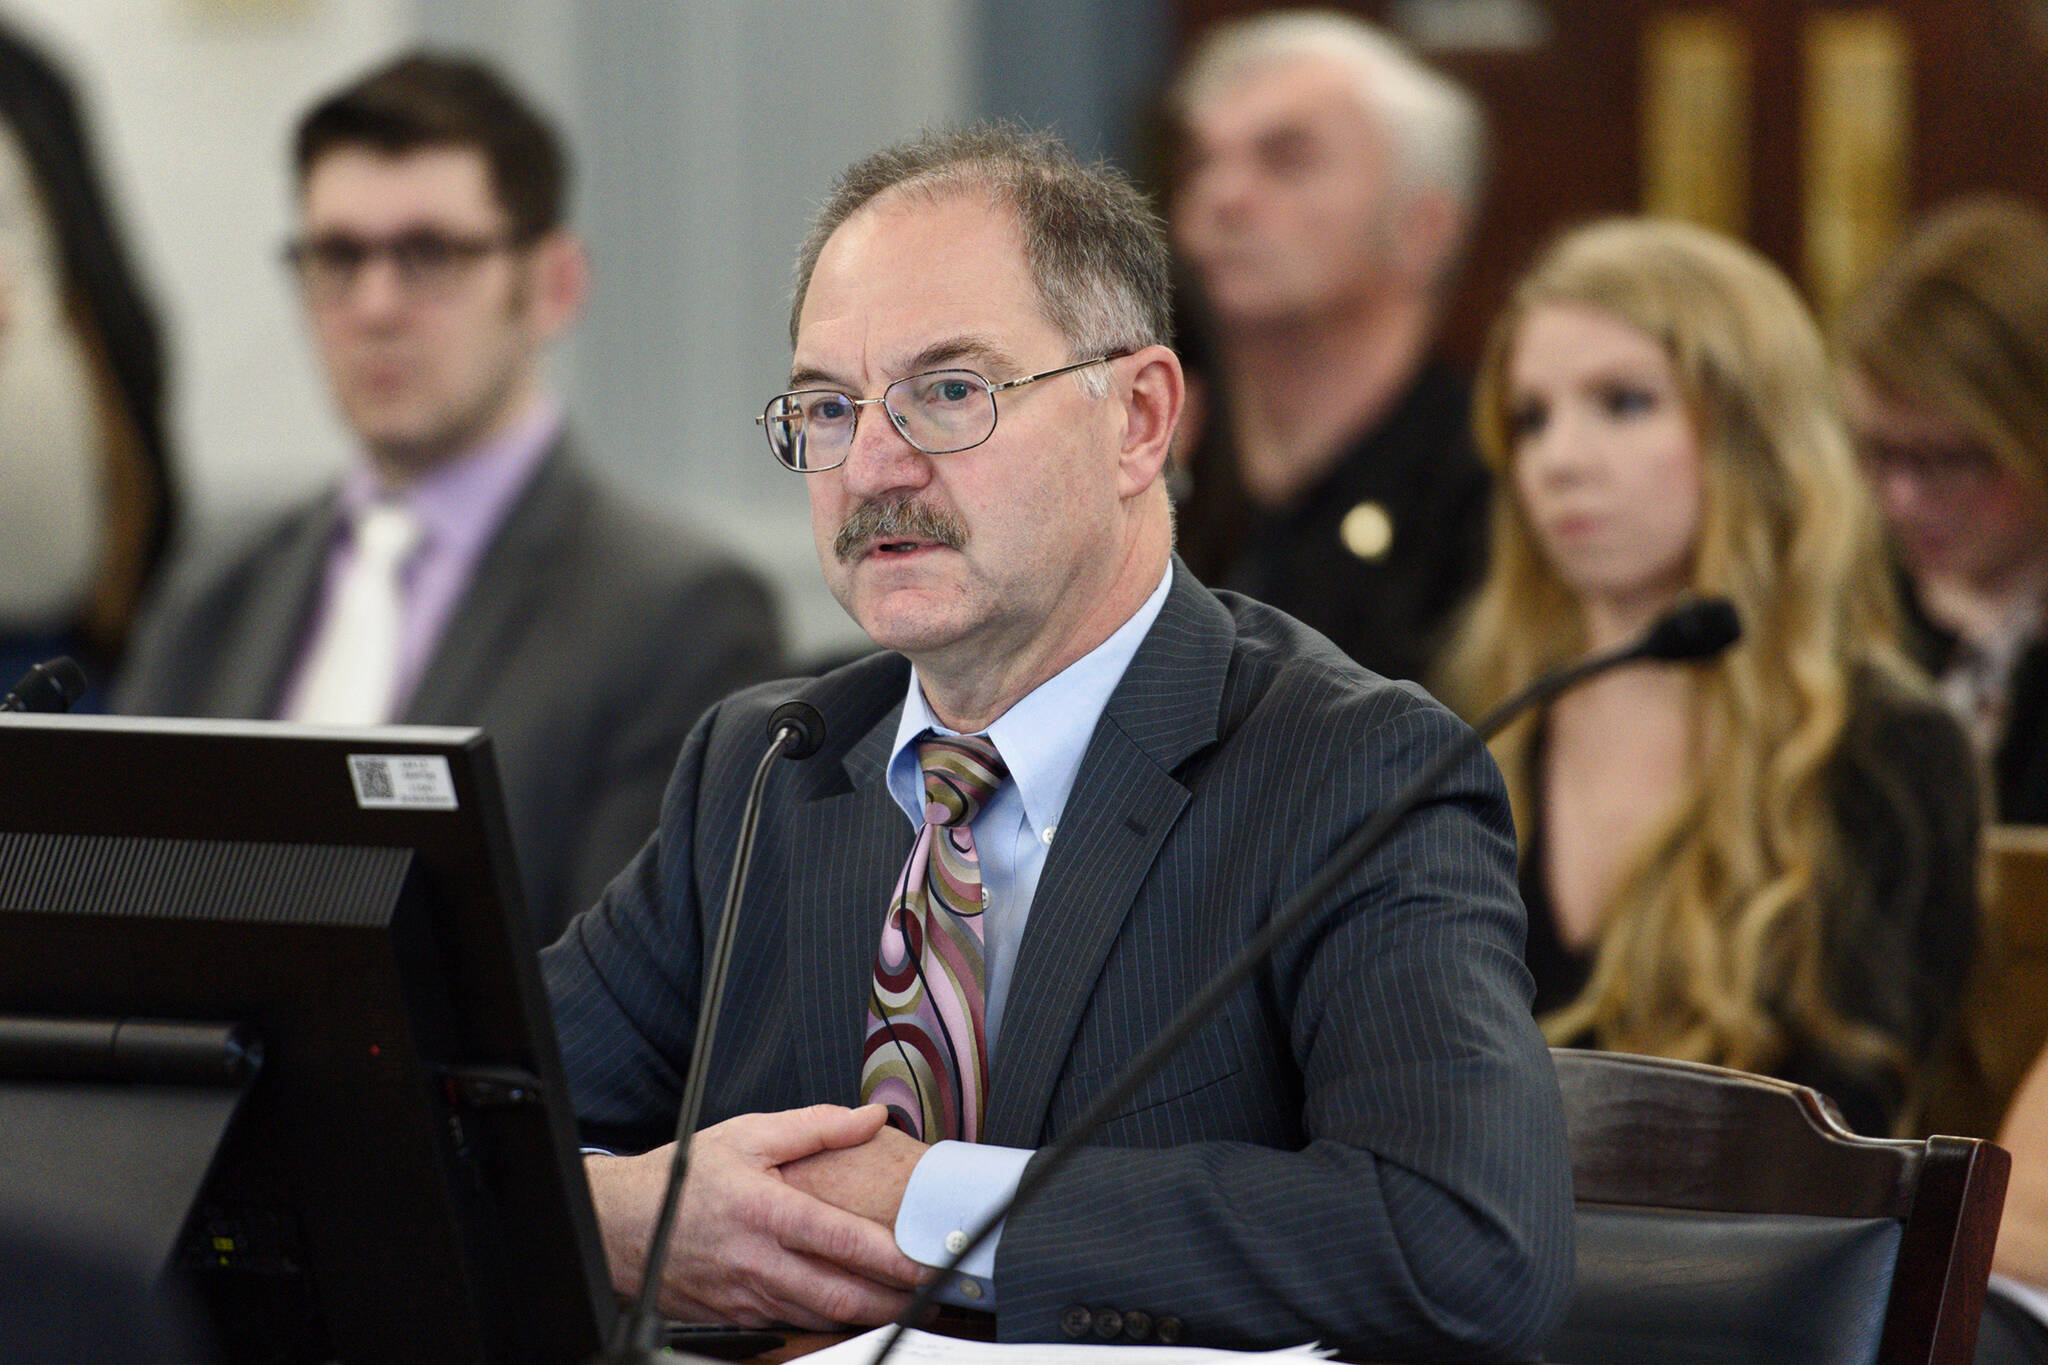 David Teal, then-director of Legislative Finance, gives an overview of the state’s fiscal situation to the Senate Finance Committee at the Capitol on Wednesday, Jan. 23, 2019. (Michael Penn / Juneau Empire File)